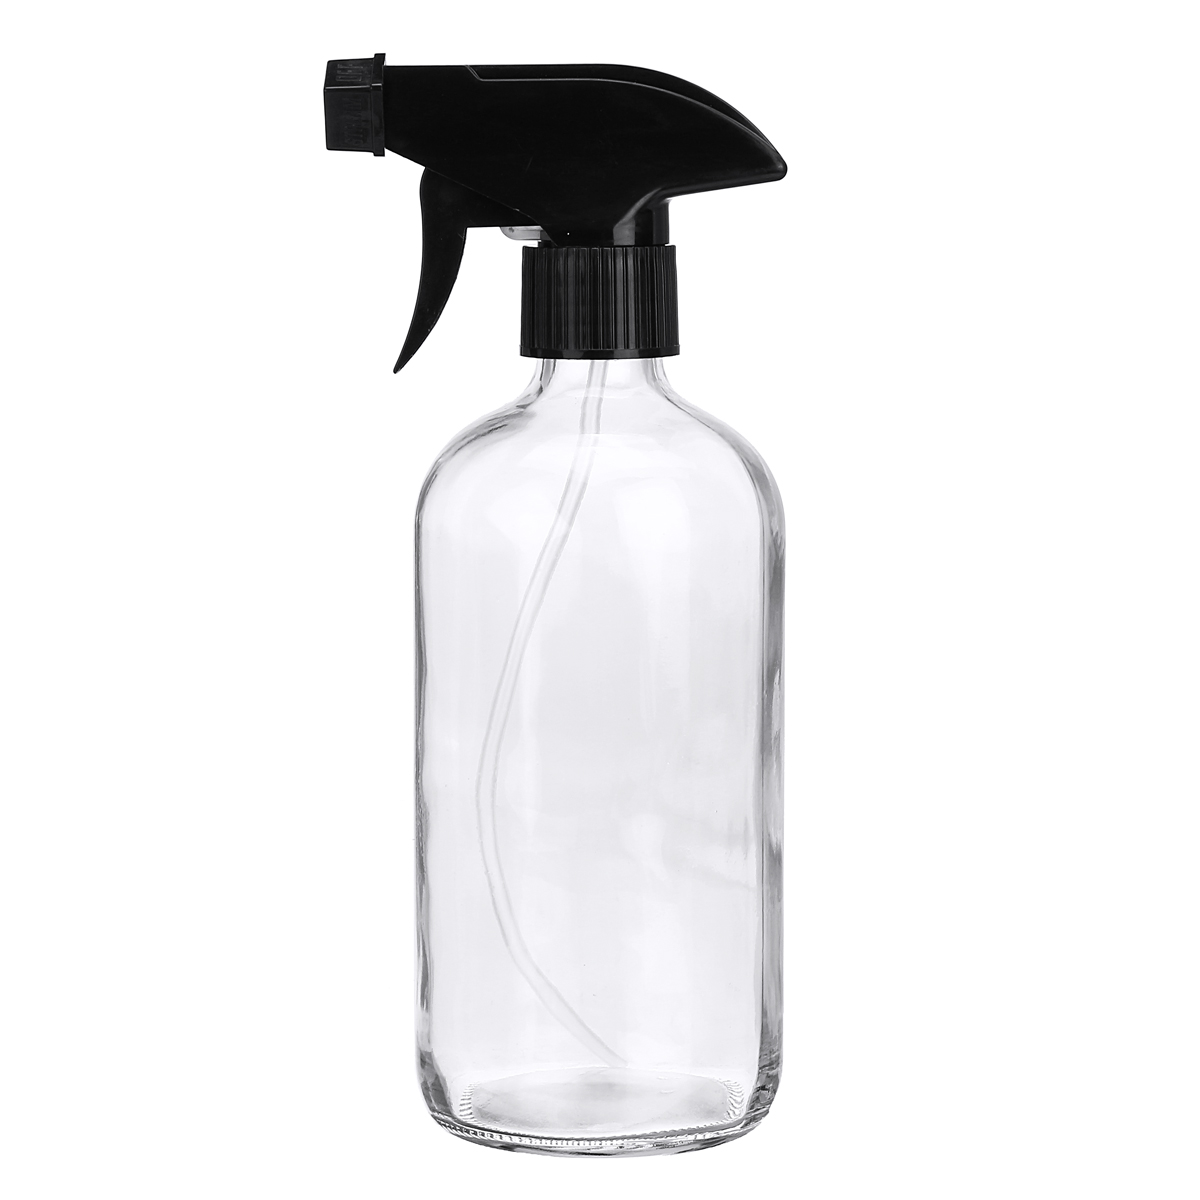 250ml500ml-Clear-Glass-Bottle-With-Trigger-Sprayer-Cap-Essential-Oil-Water-Spraying-Bottle-1690680-8